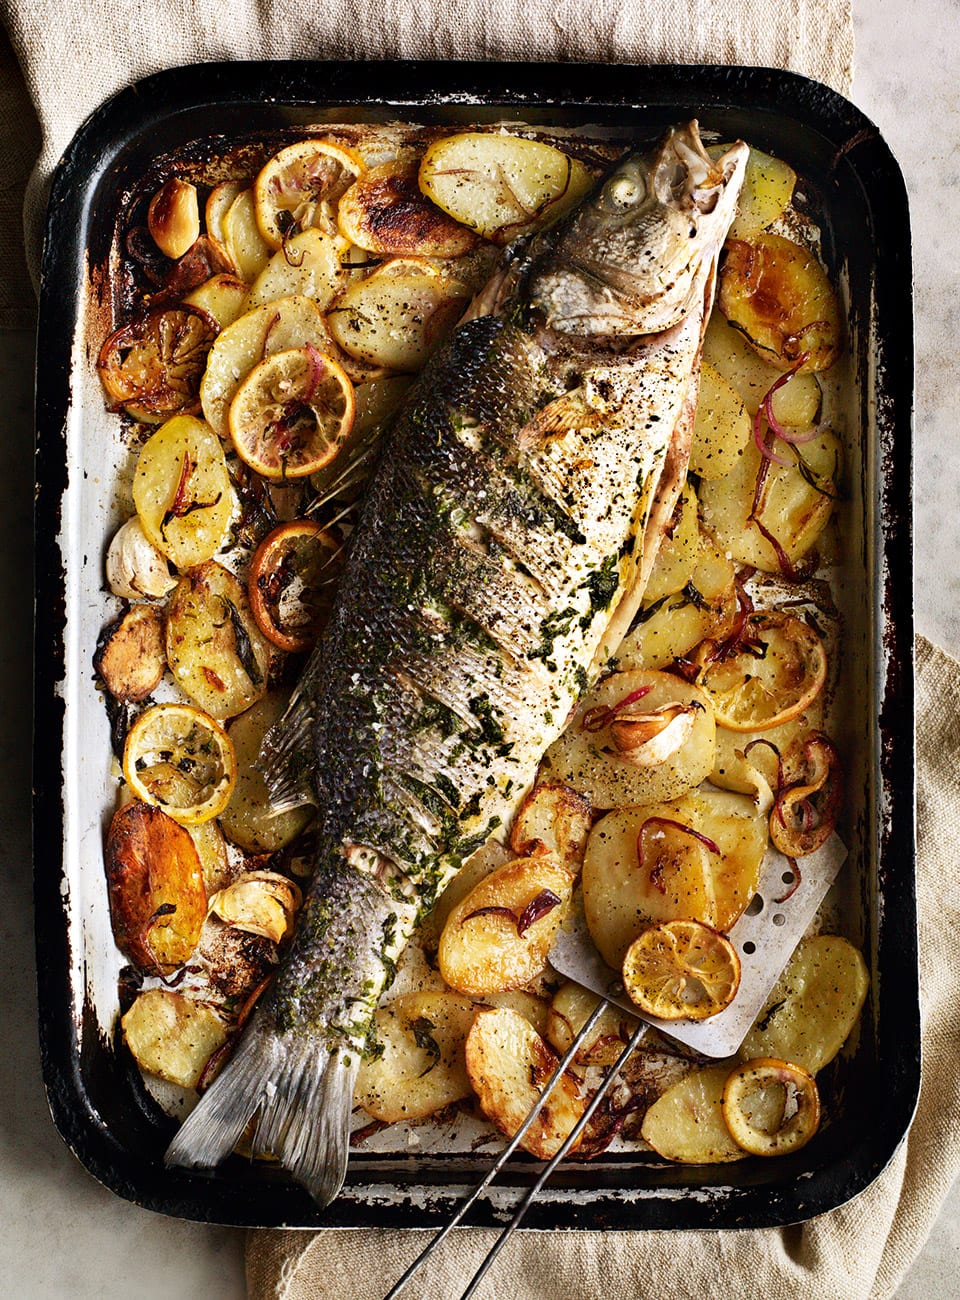 Whole roast fish with lemon and tarragon butter - delicious. magazine